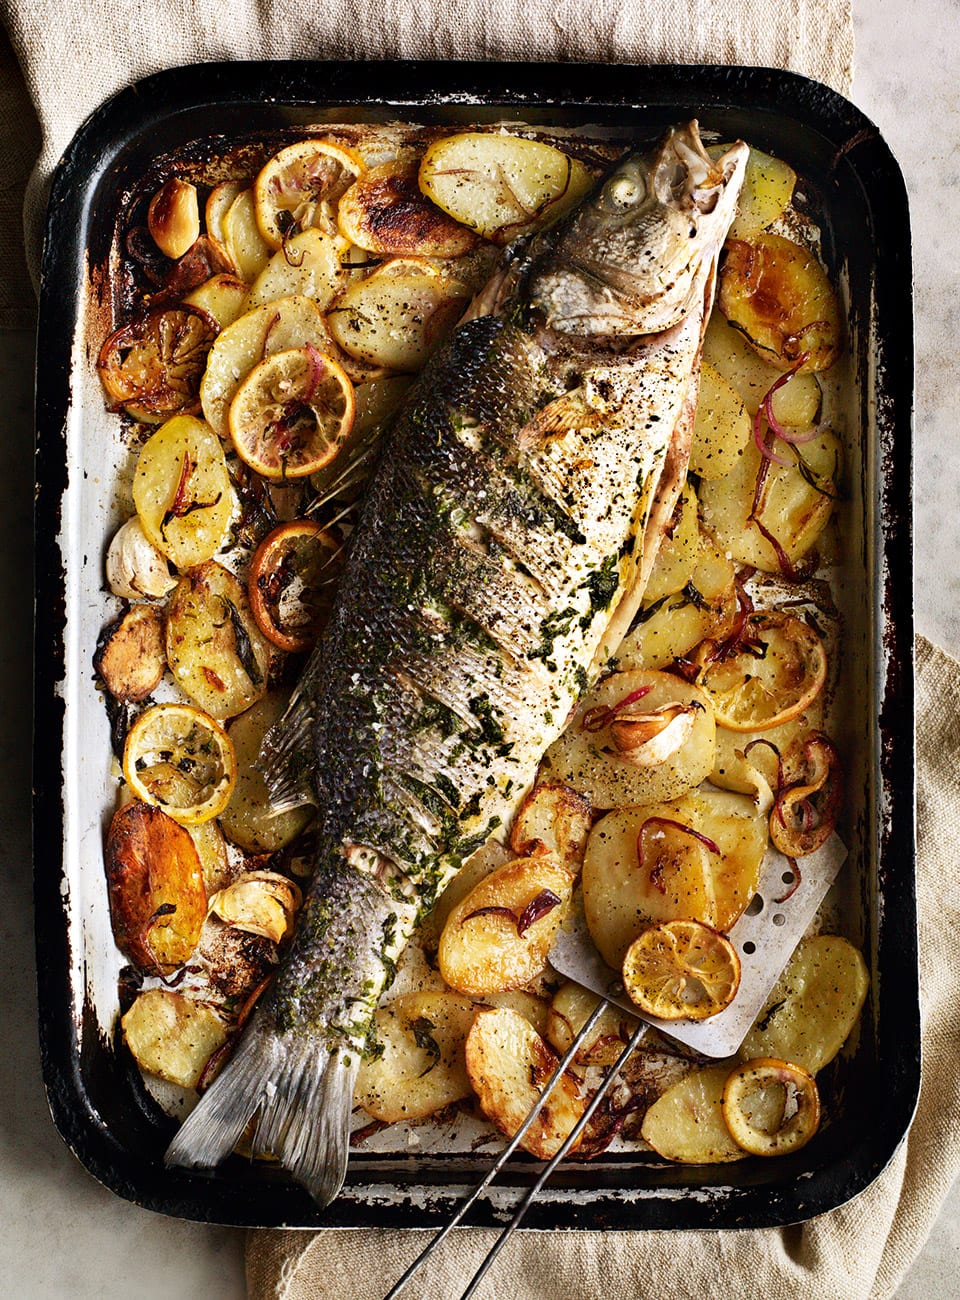 Whole roast fish with lemon and tarragon butter - delicious. magazine